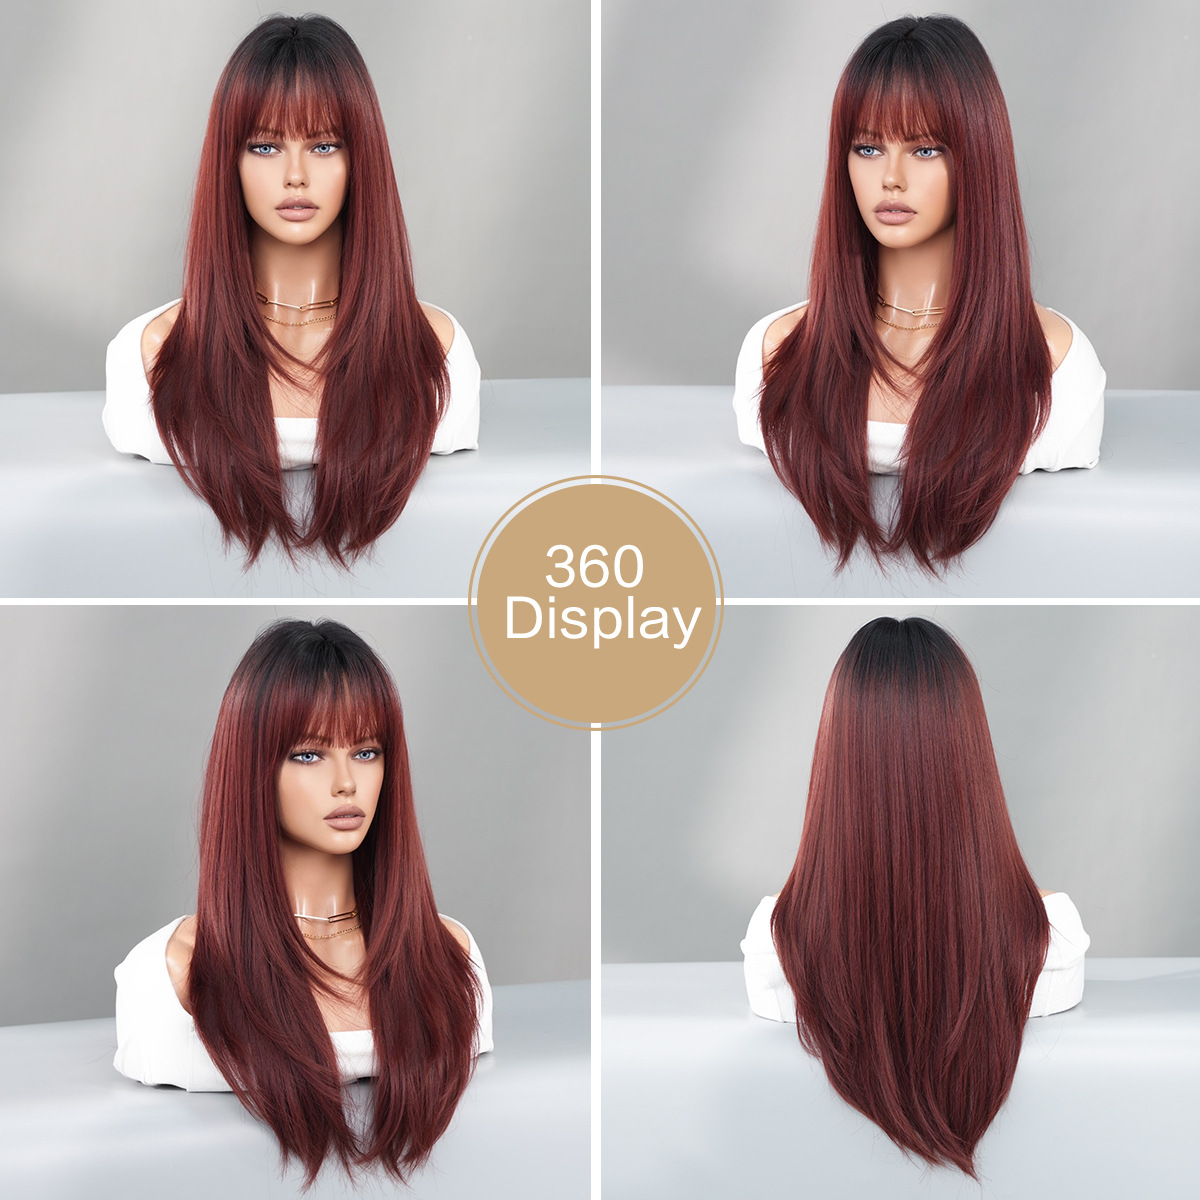 A trendy dark red wig featuring long, curly synthetic hair, perfect for a ready-to-wear fashionable style